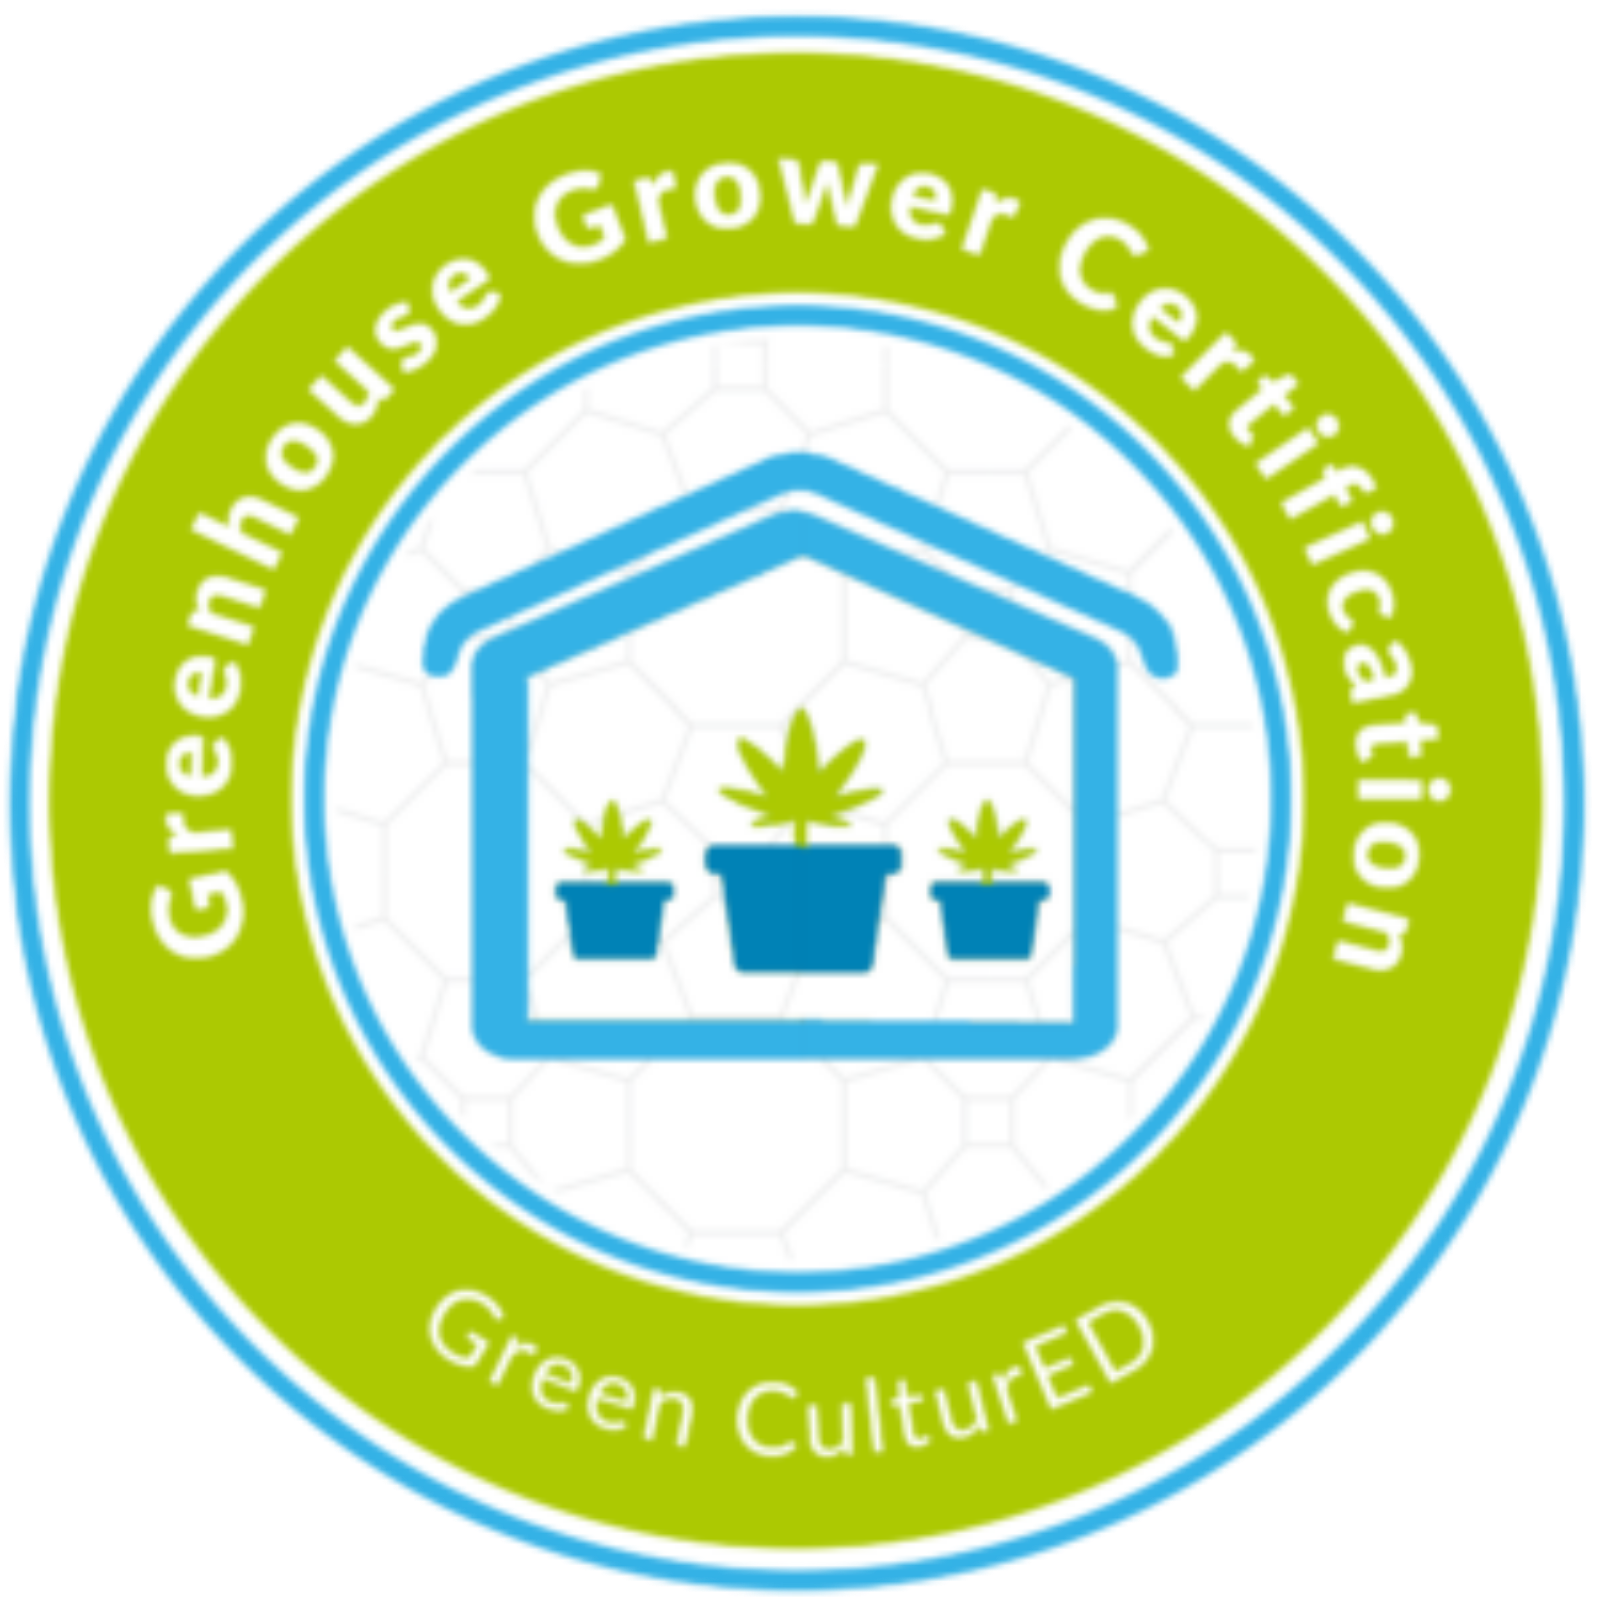 Greenhouse Grower Certification Leafly